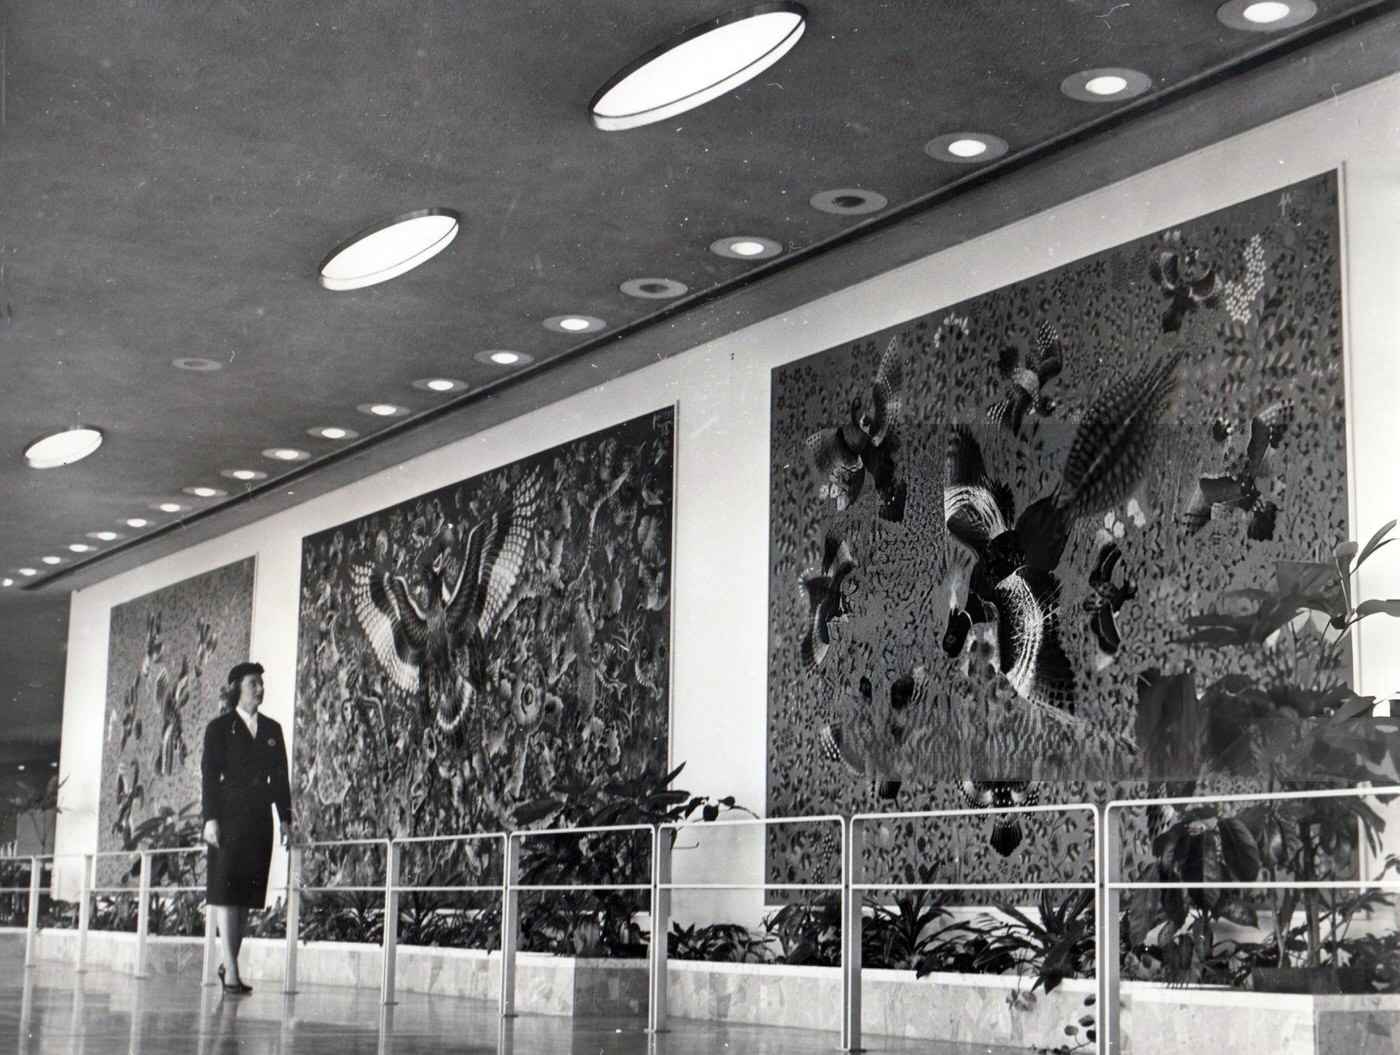 Daphne Thomas, Customer Service Representative For Air France, Looks At Tapestries By Rene Perrot At Idlewild Airport, 1960.